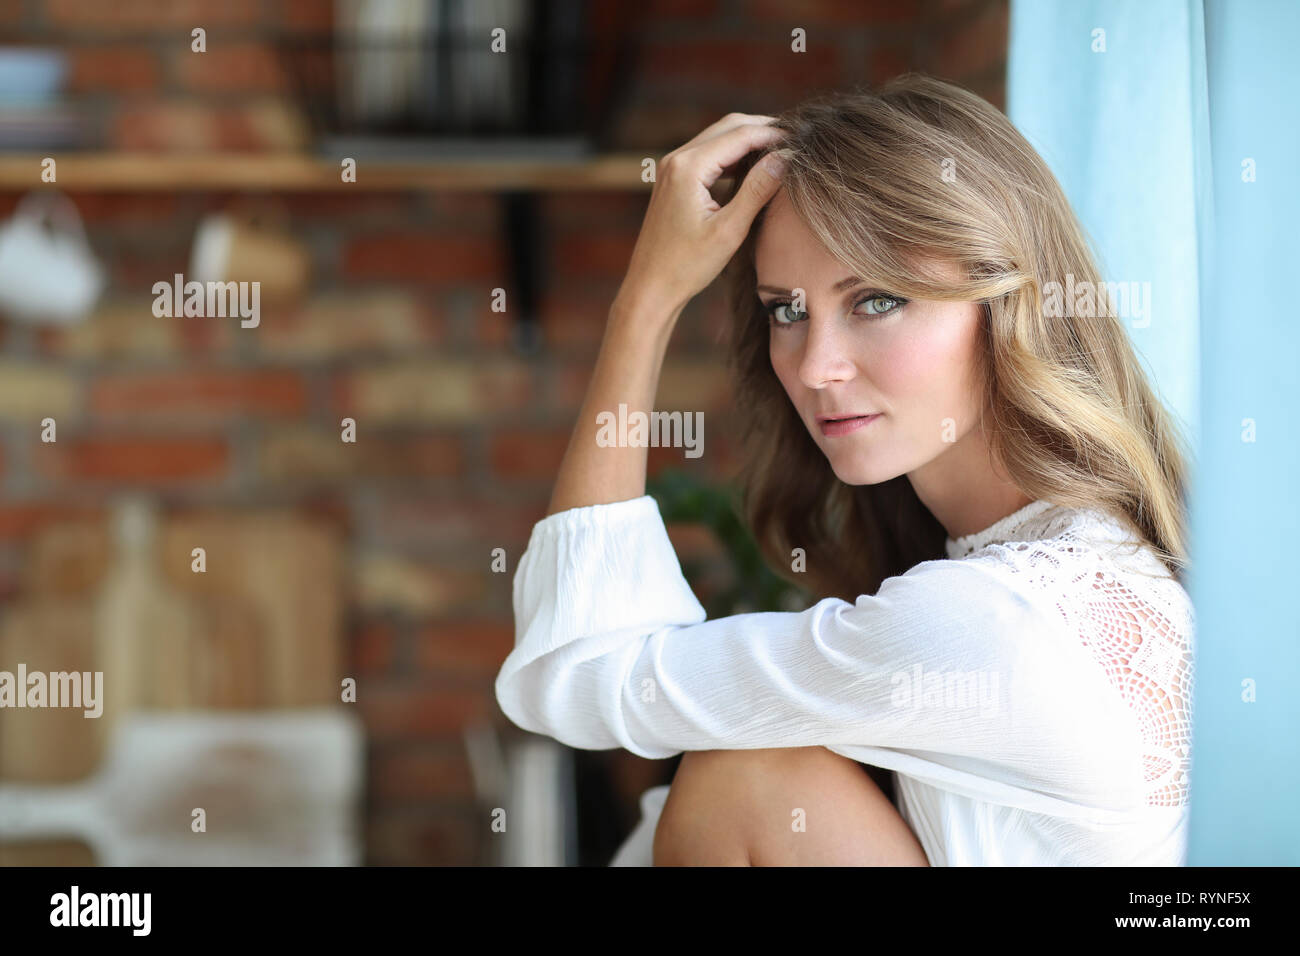 Beautiful woman with blond hair Stock Photo